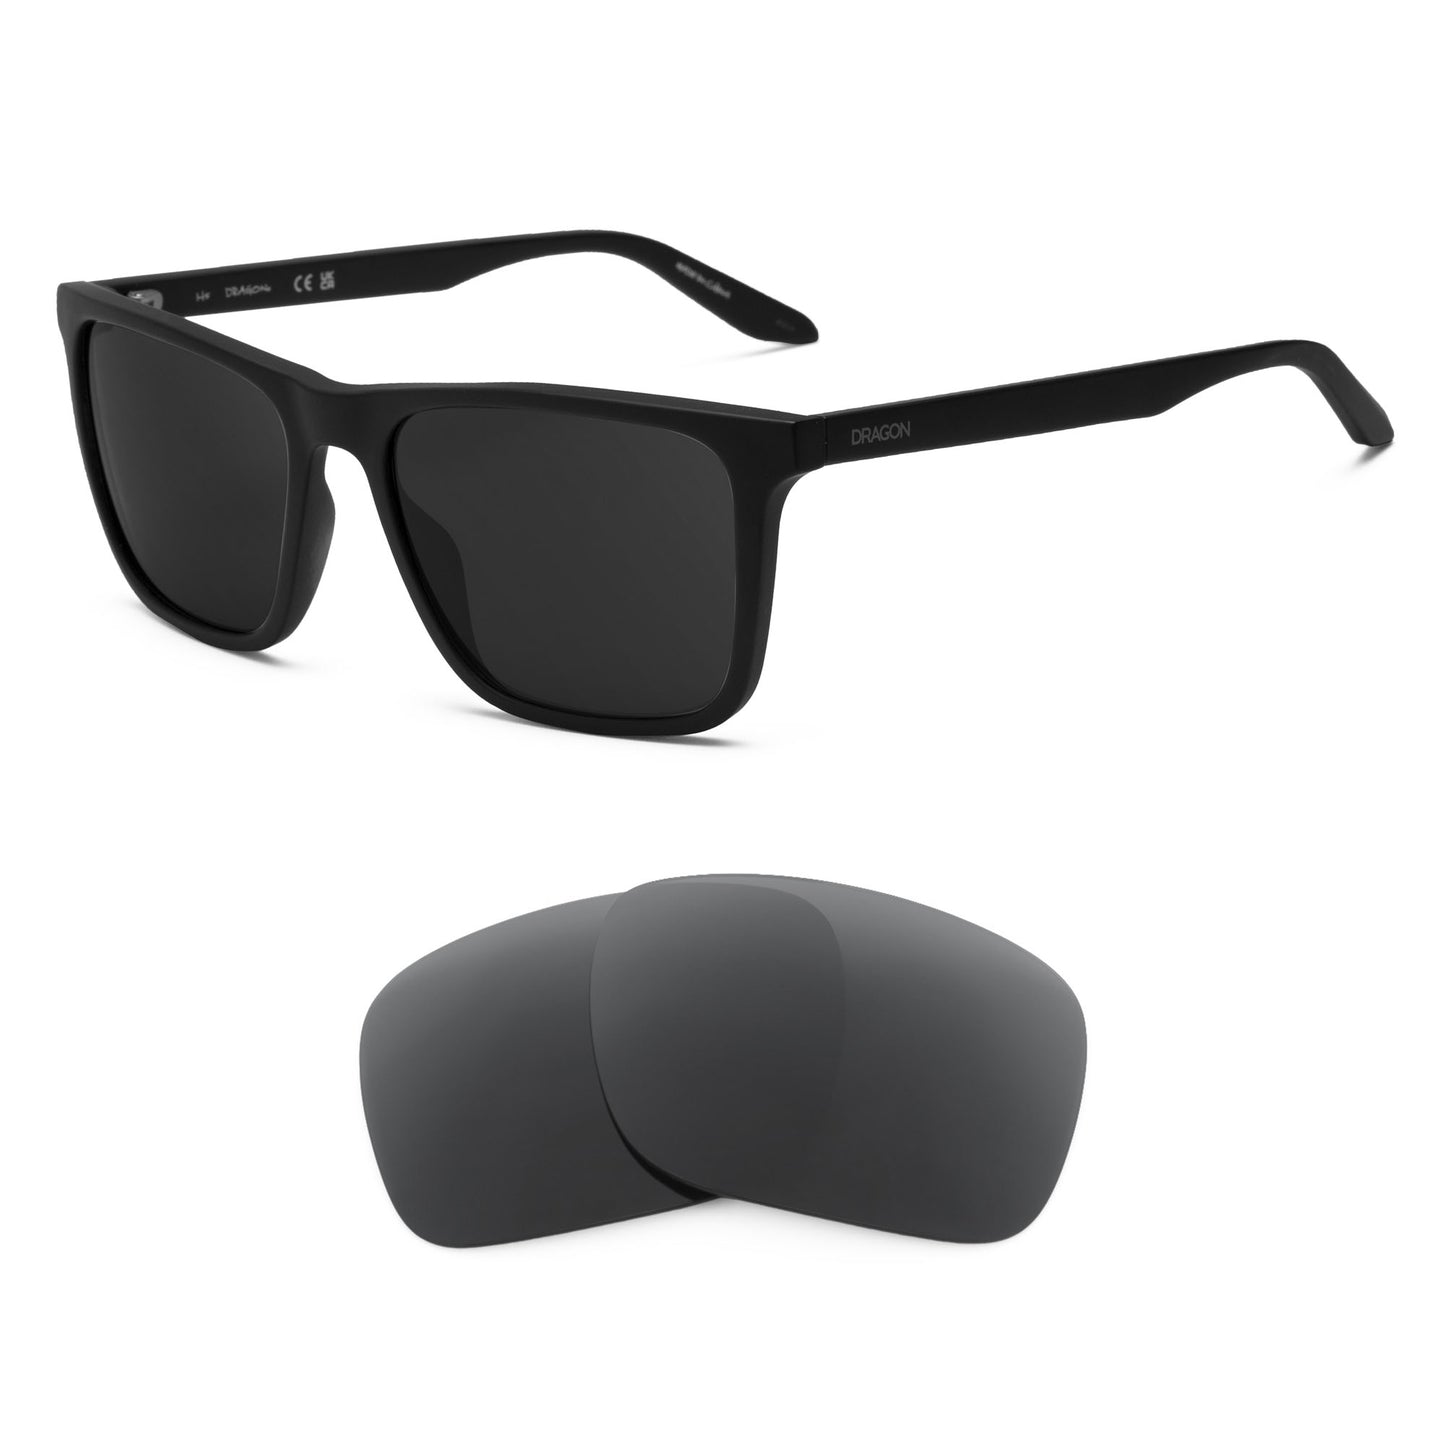 Dragon Renew sunglasses with replacement lenses